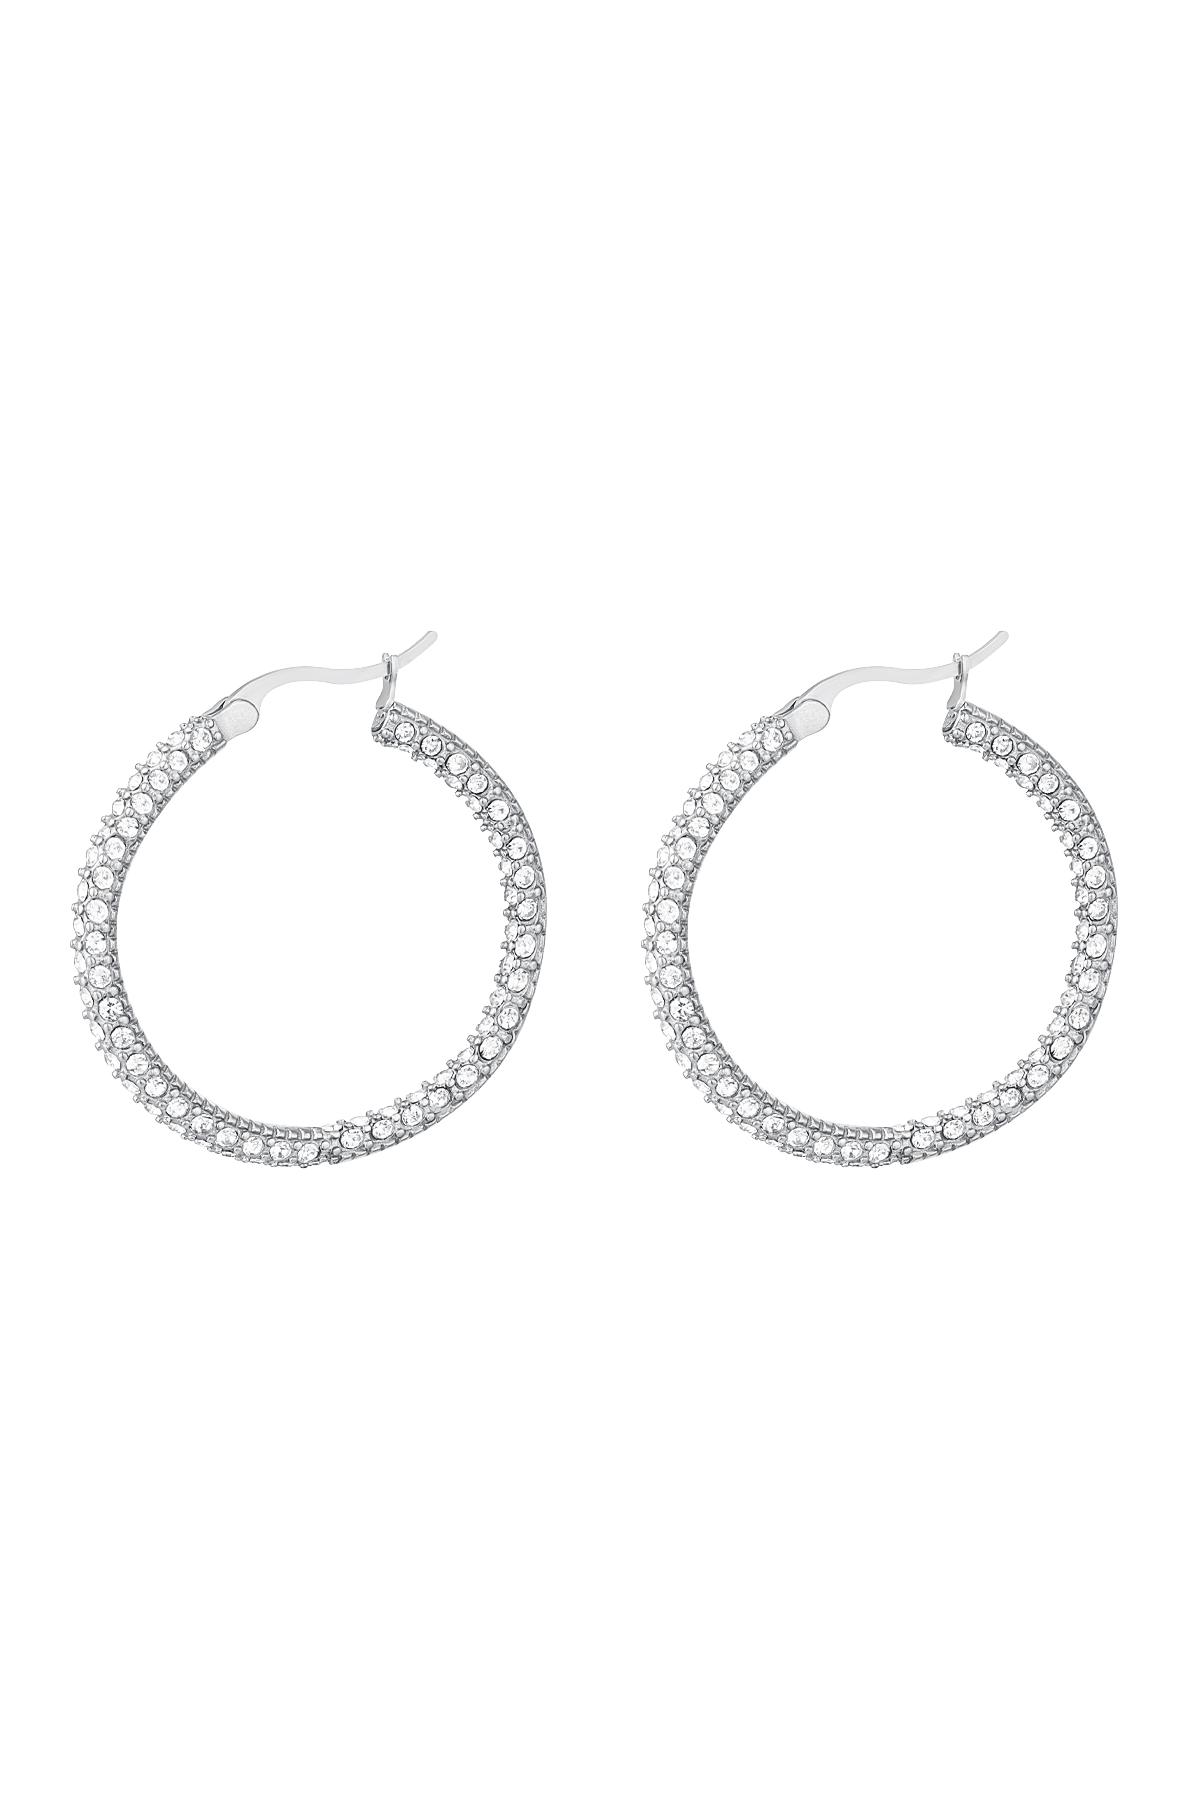 Round zircon earrings - large Silver Stainless Steel h5 